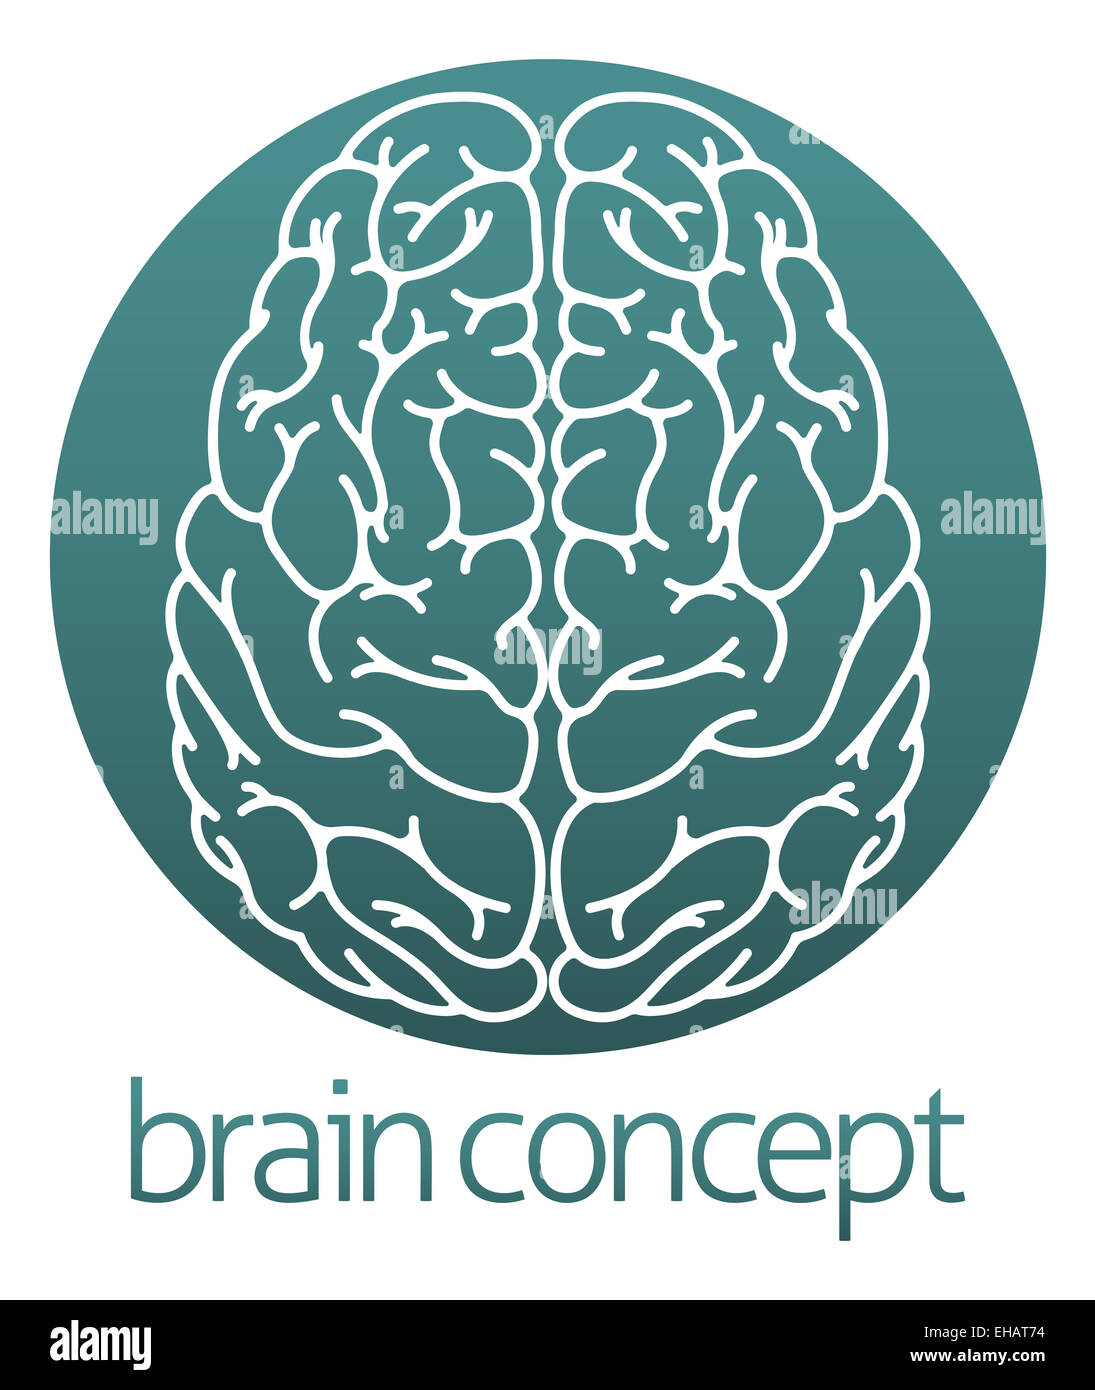 An abstract illustration of a brain circle concept design Stock Photo